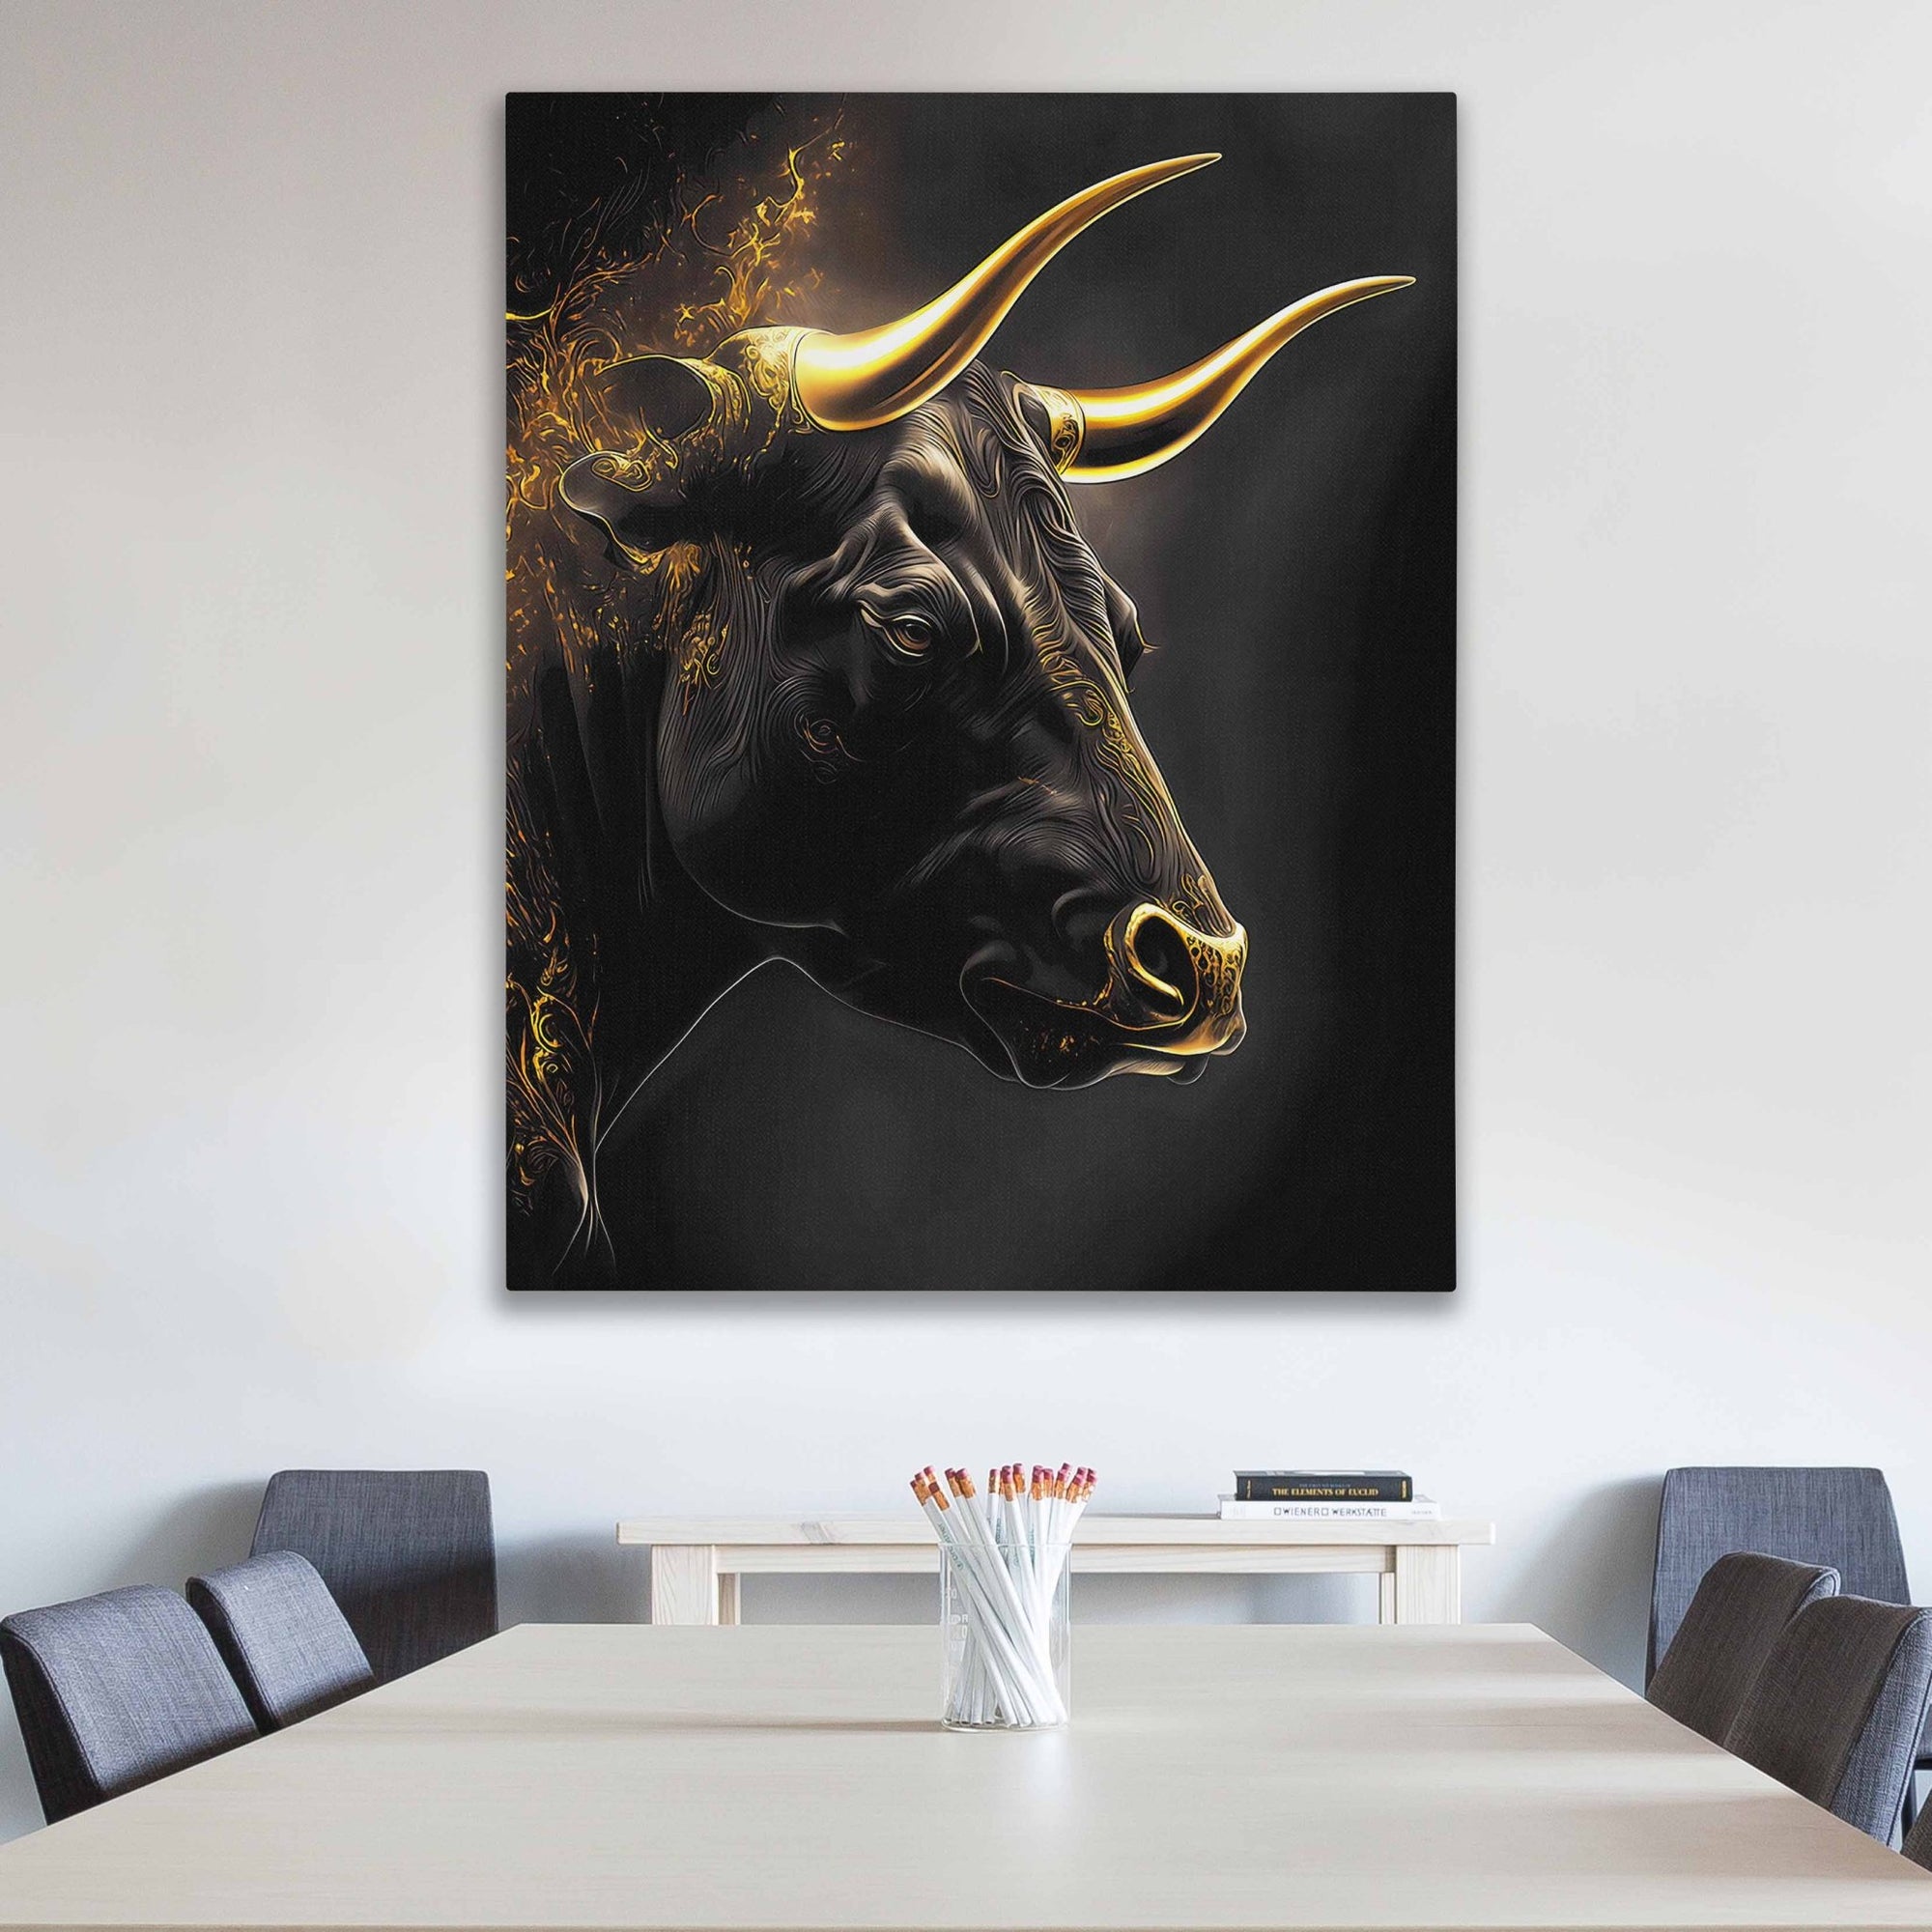 Majestic Bull Paintings: Capturing Power on Canvas - Luxury Wall Art